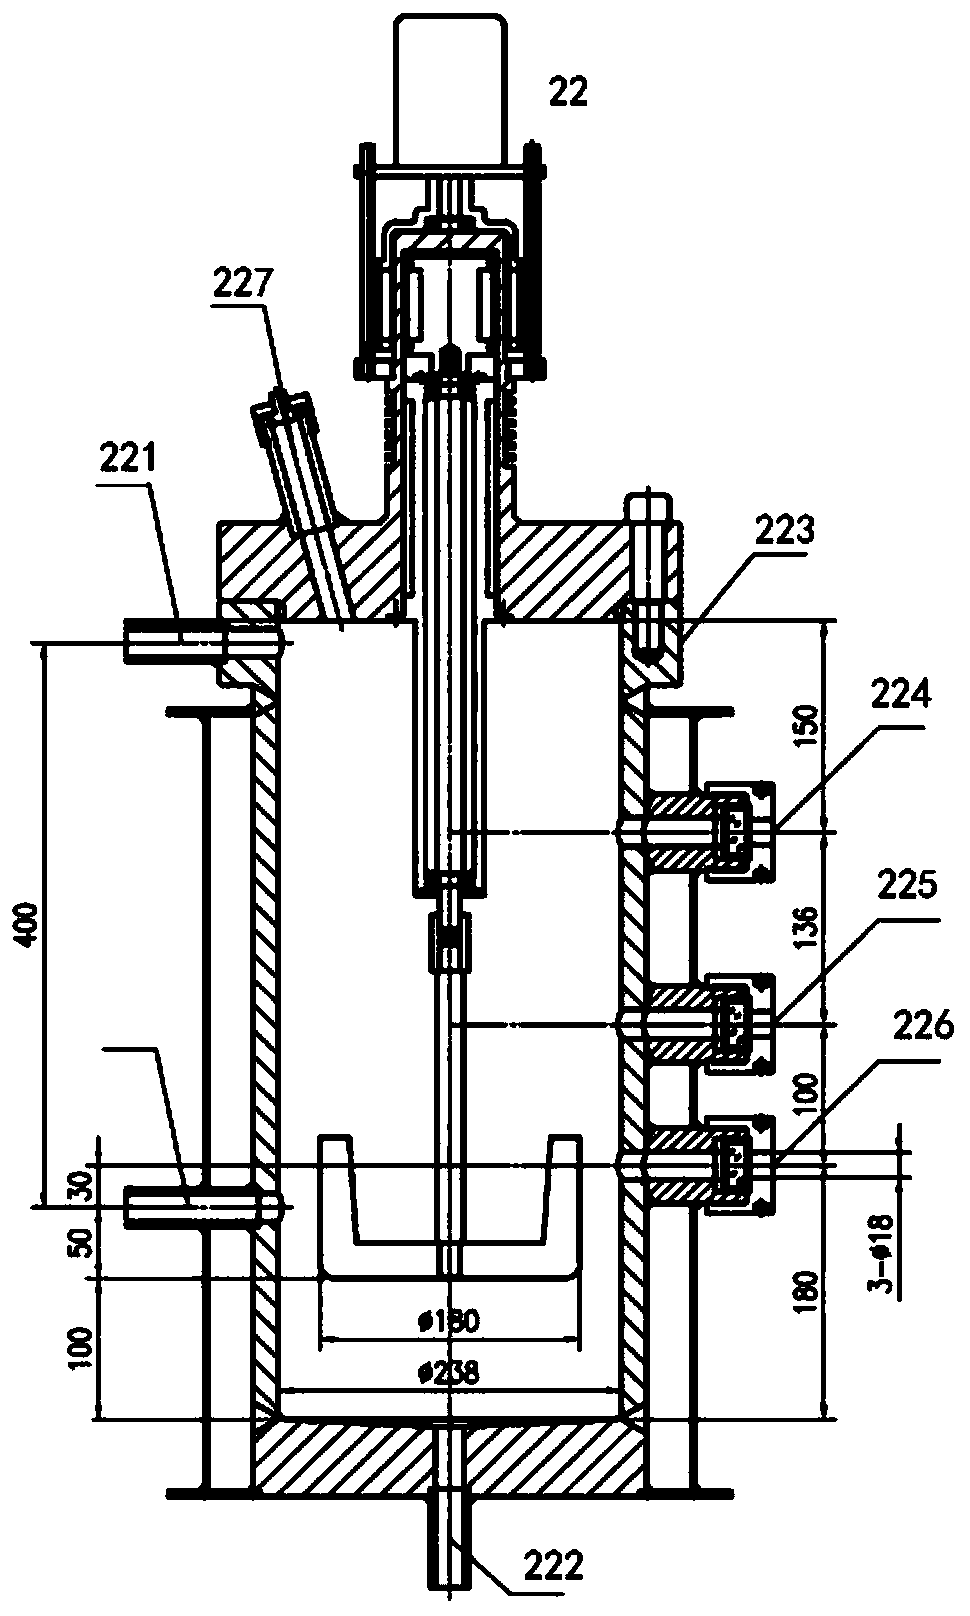 High-pressure oil-gas-water pipe wax-flowing deposition simulation experimental device